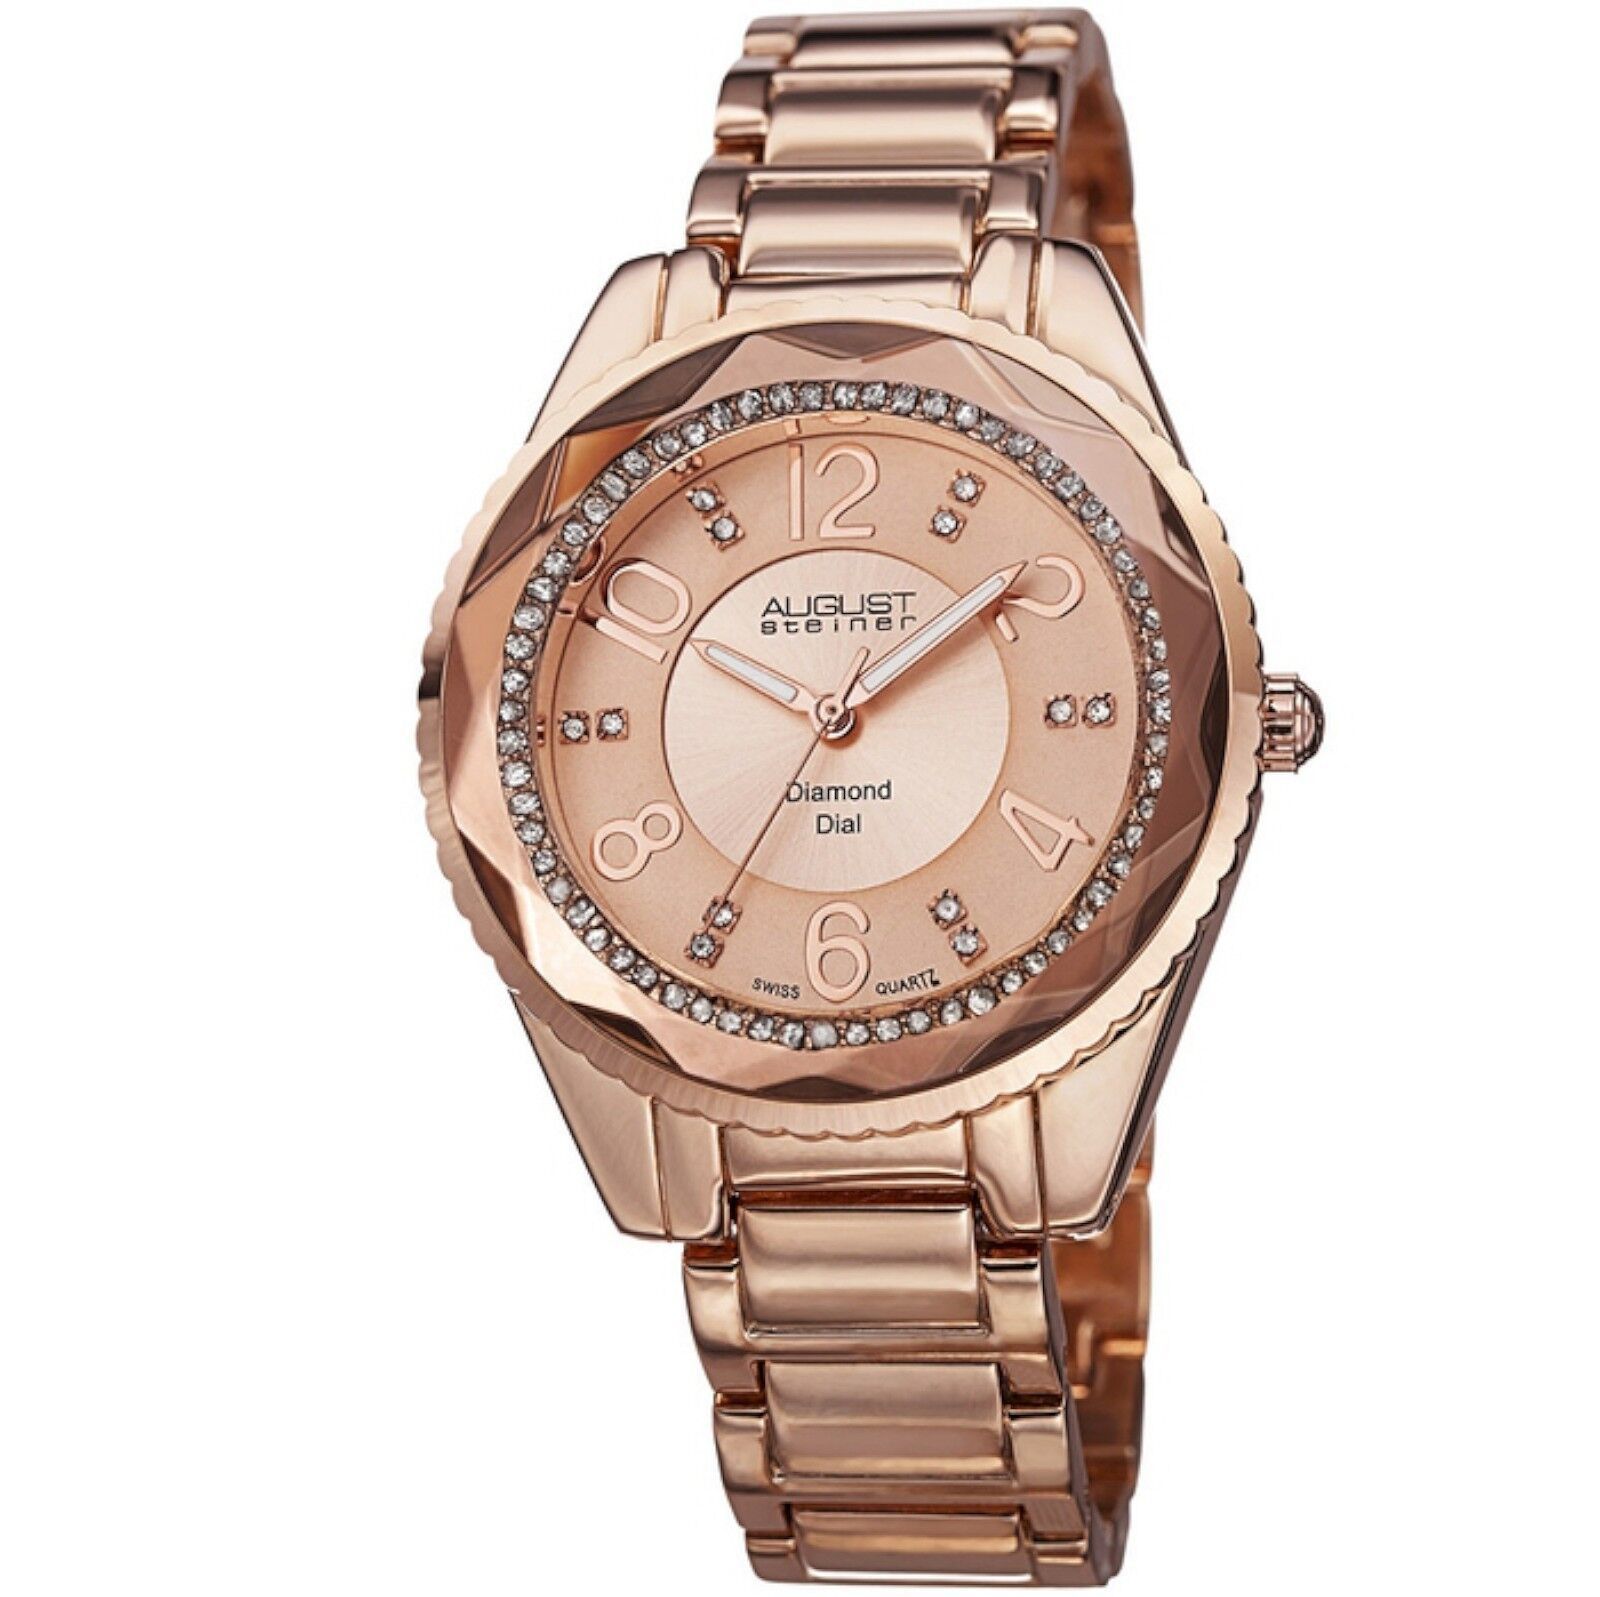 Primary image for NEW August Steiner AS8122RG Rose Gold-Tone Womens Watch Crystal Bezel diamond